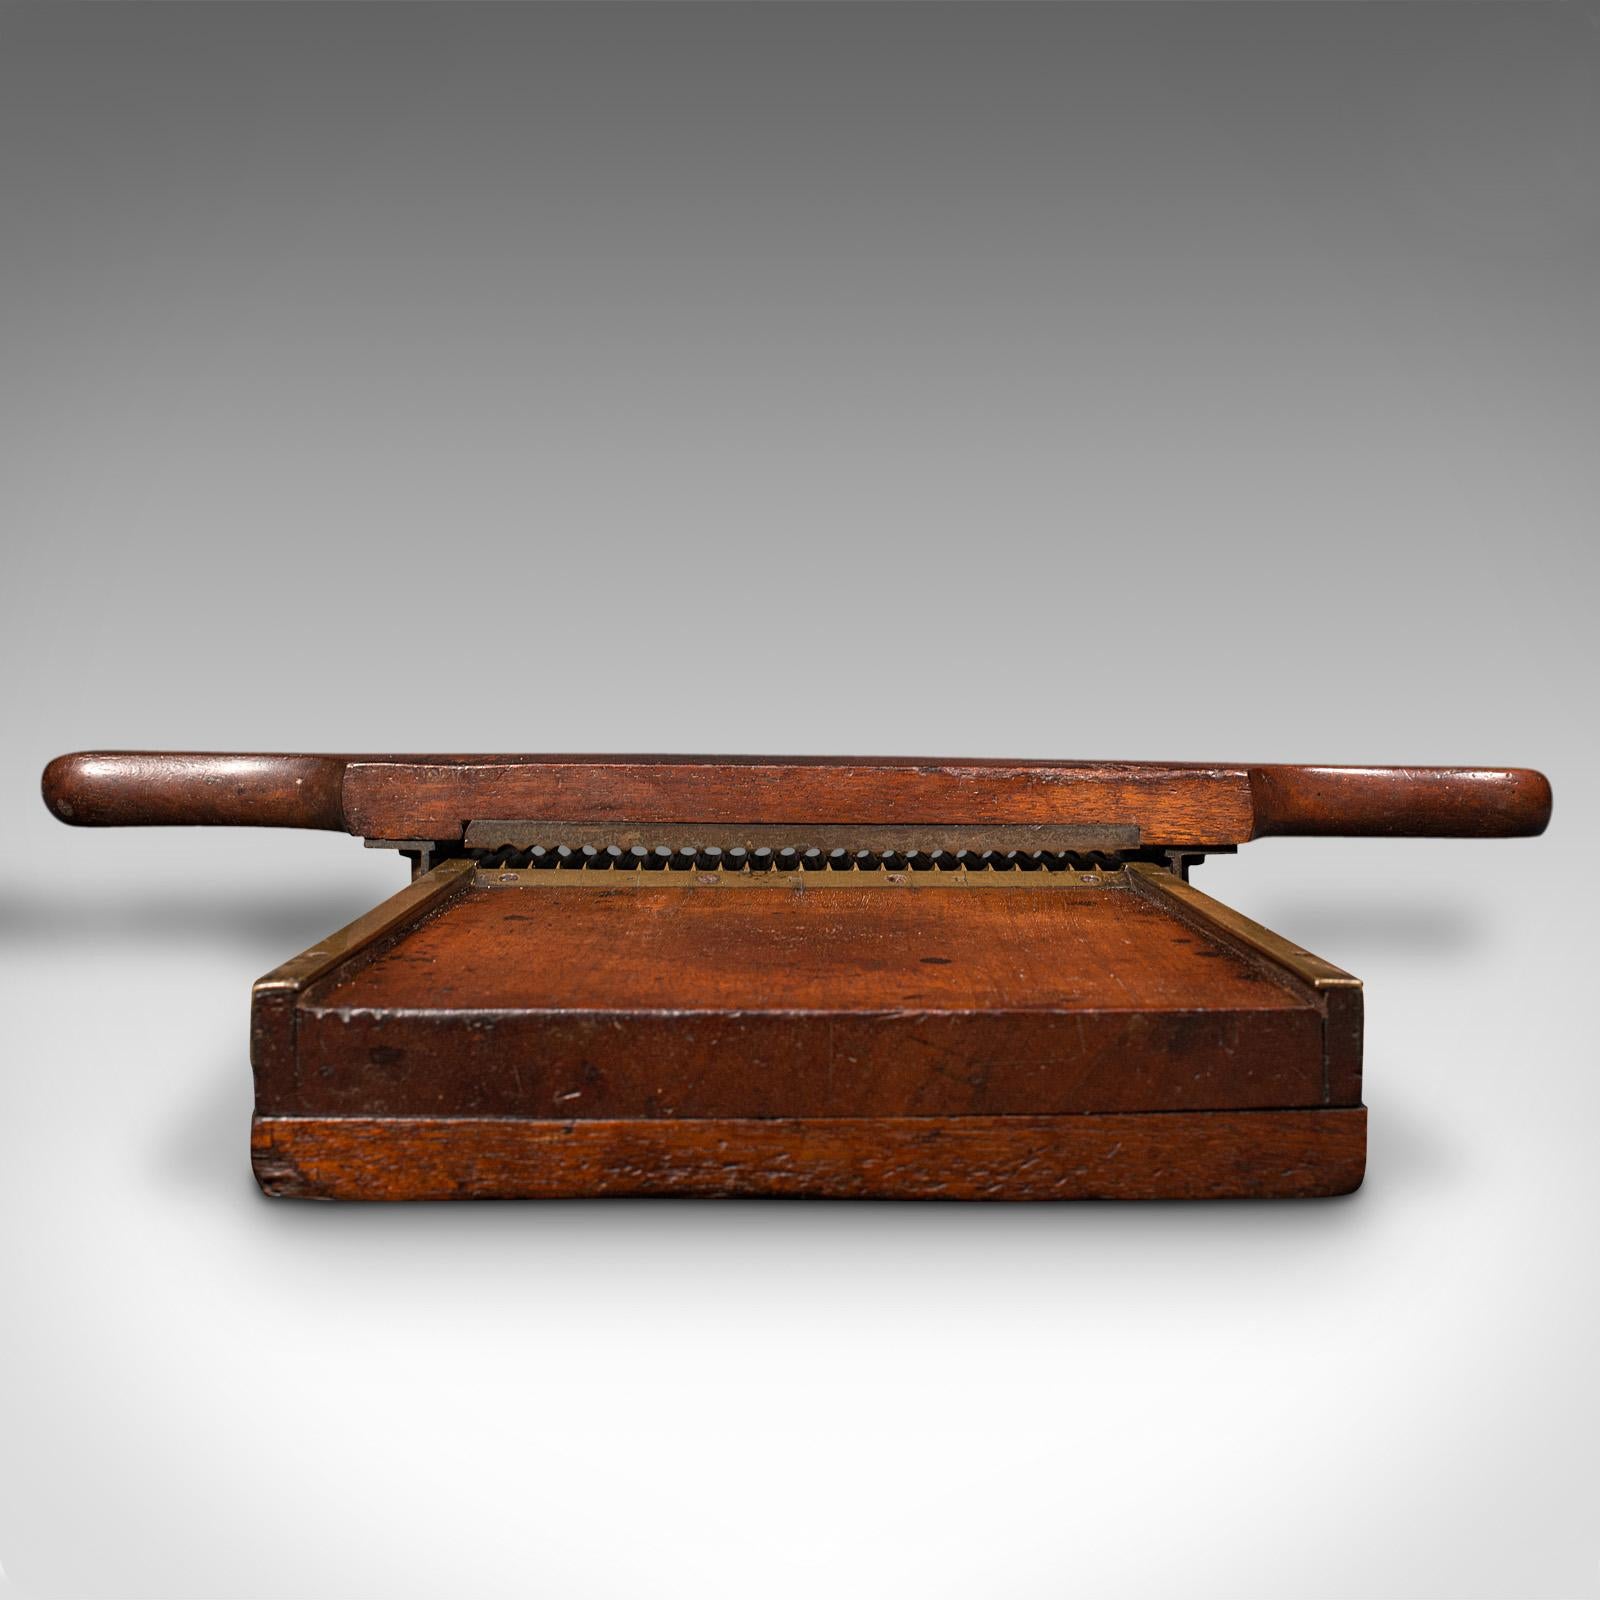 This is an antique apothecary pill rolling machine. An English, mahogany and brass chemist's countertop instrument, dating to the early Victorian period, circa 1850.

Fascinating example of an apothecary roller, with a desirable display